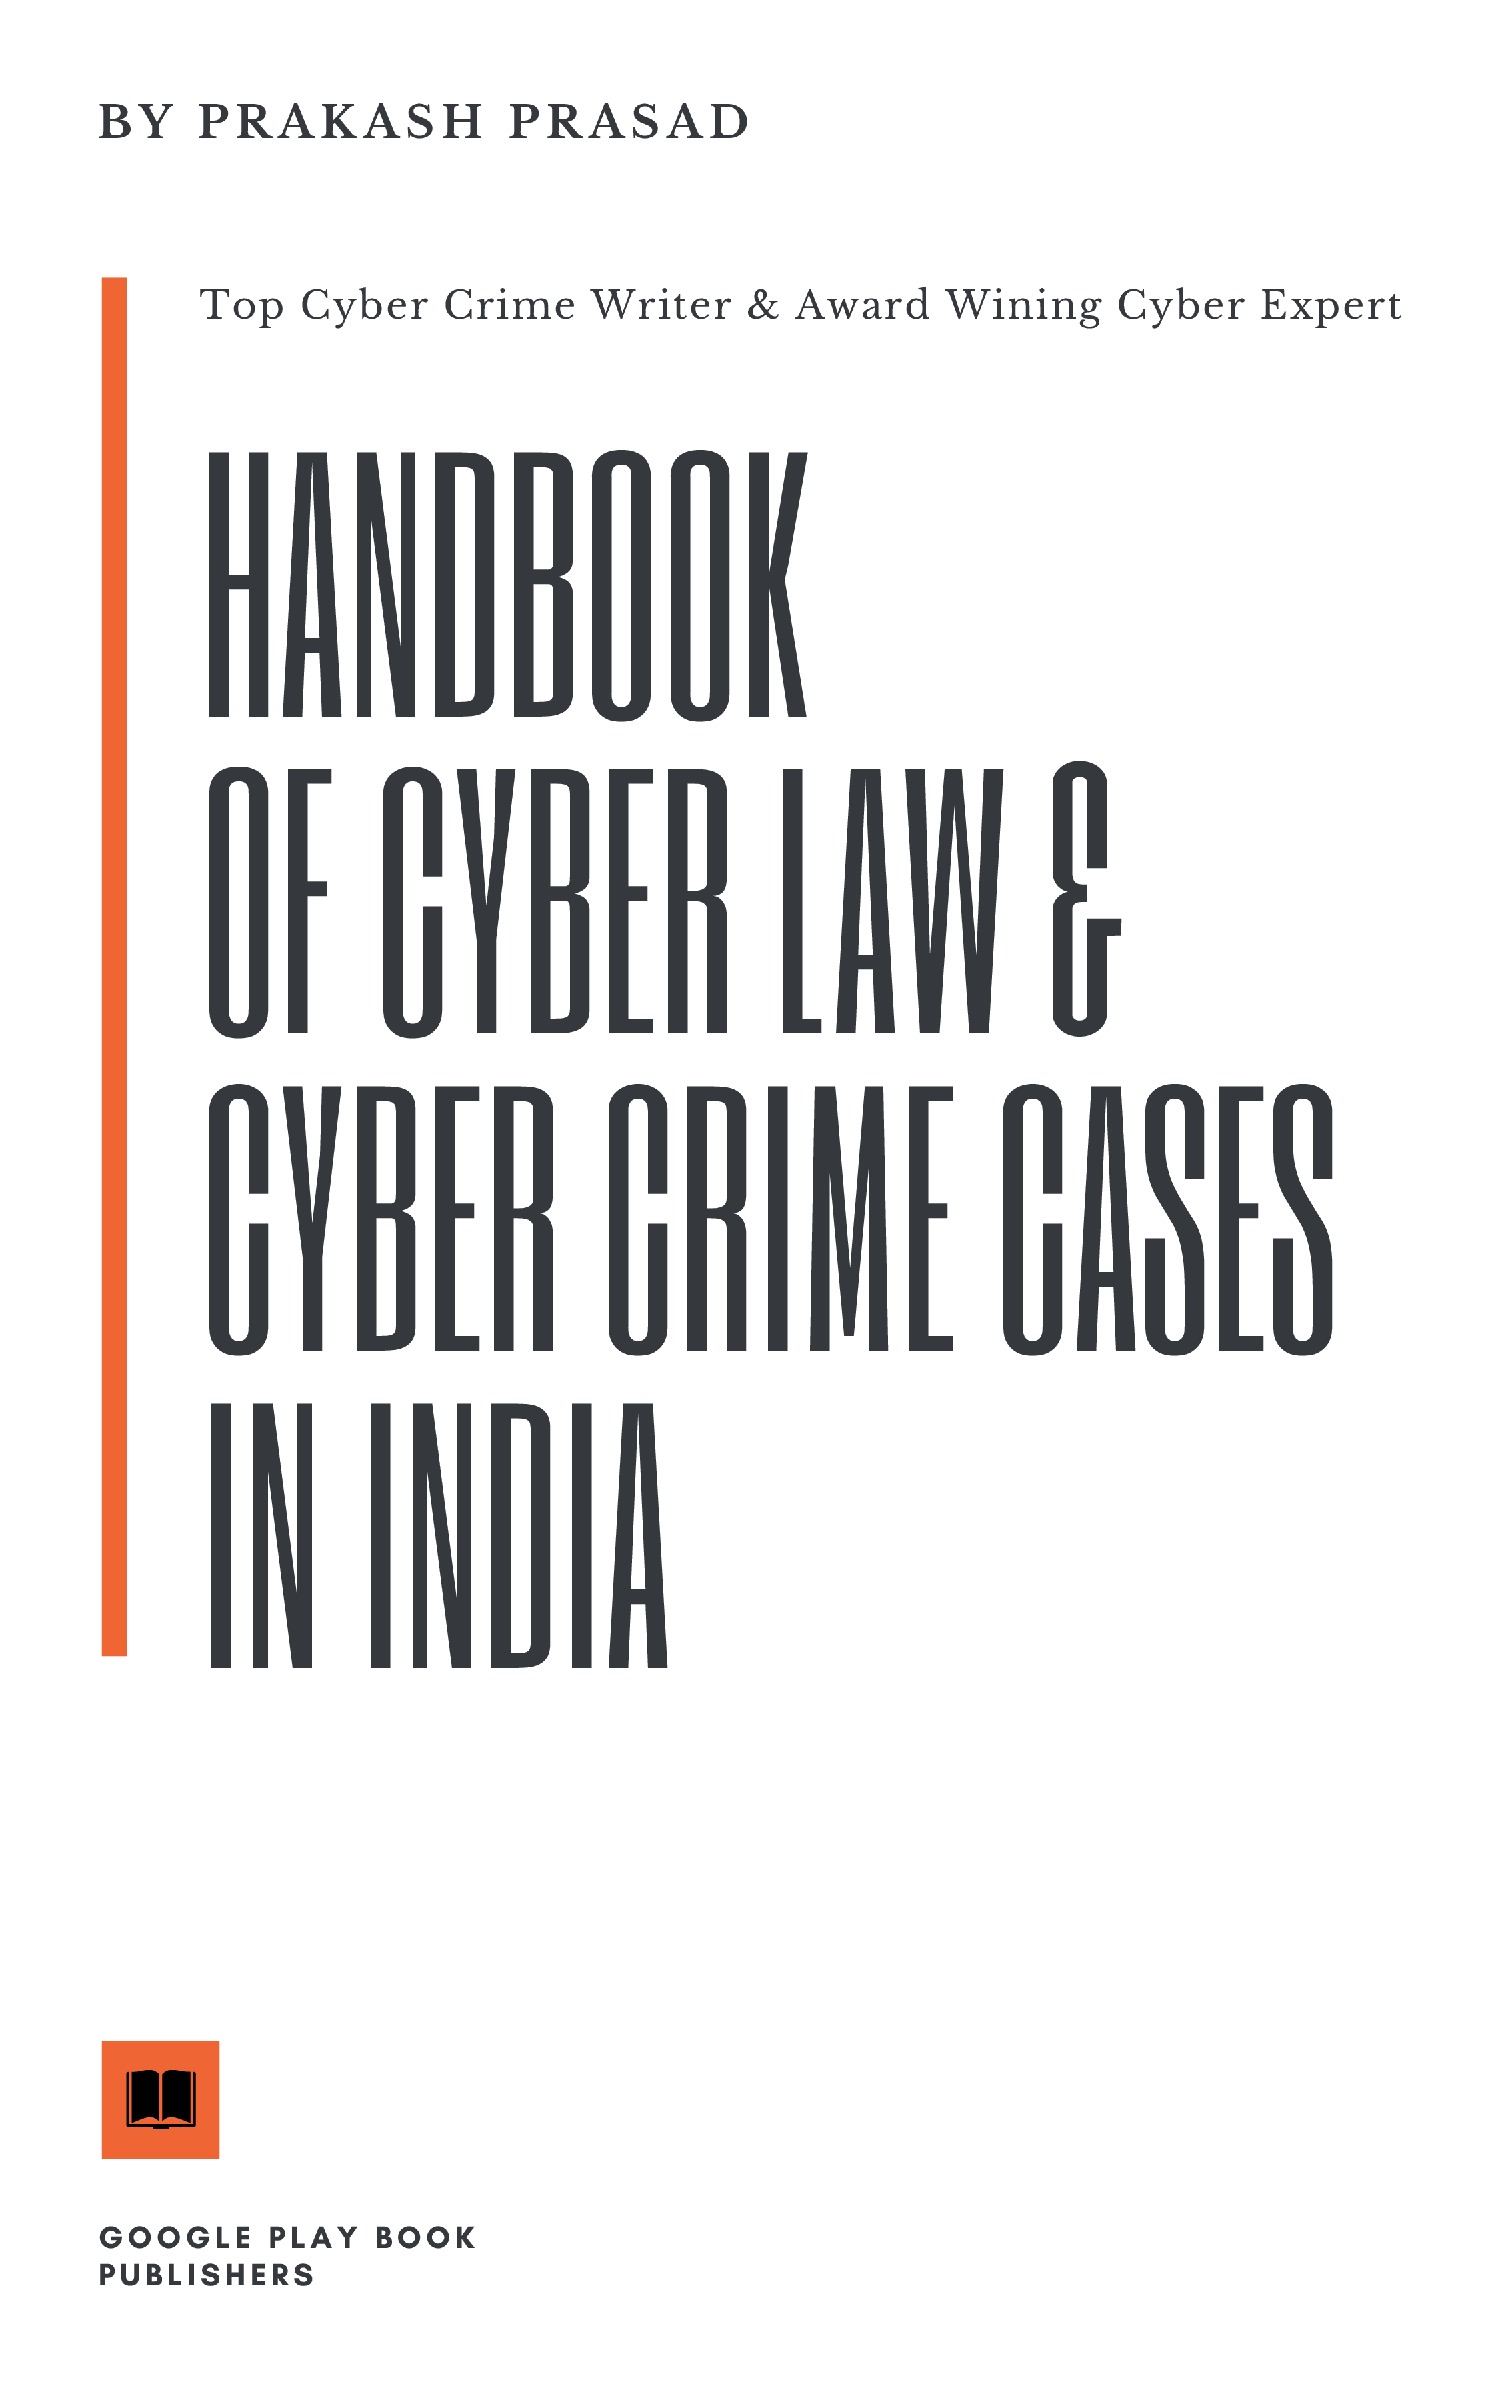 dissertation on cyber crime in india pdf